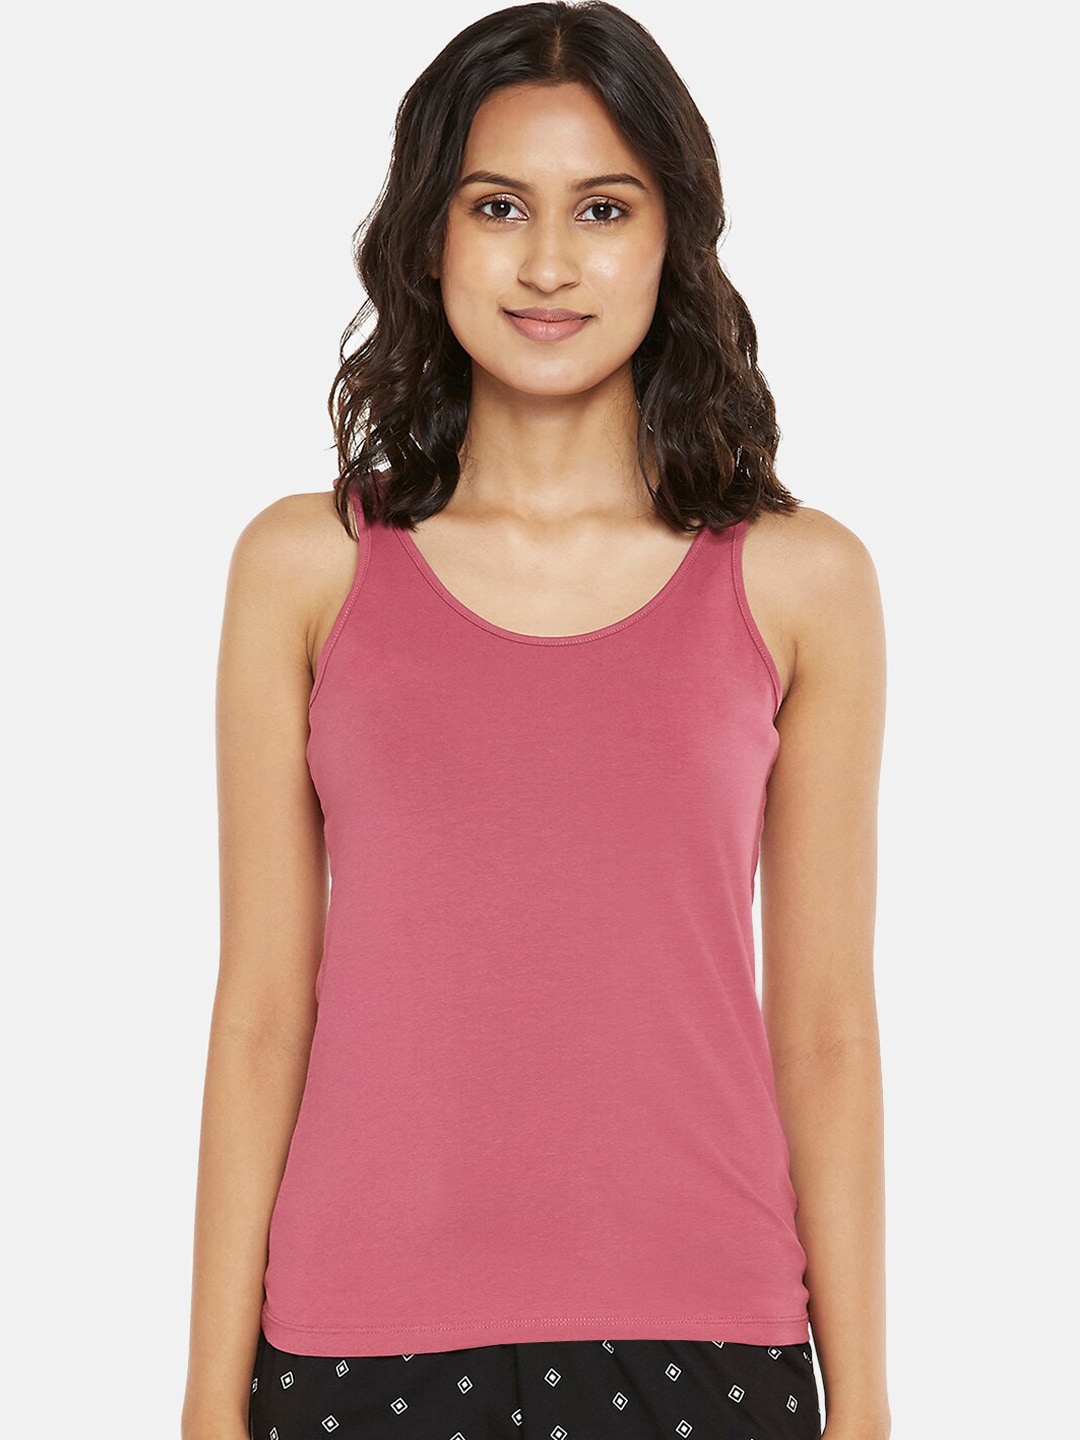 Dreamz by Pantaloons Women Pink Solid Tank Lounge T-shirt Price in India